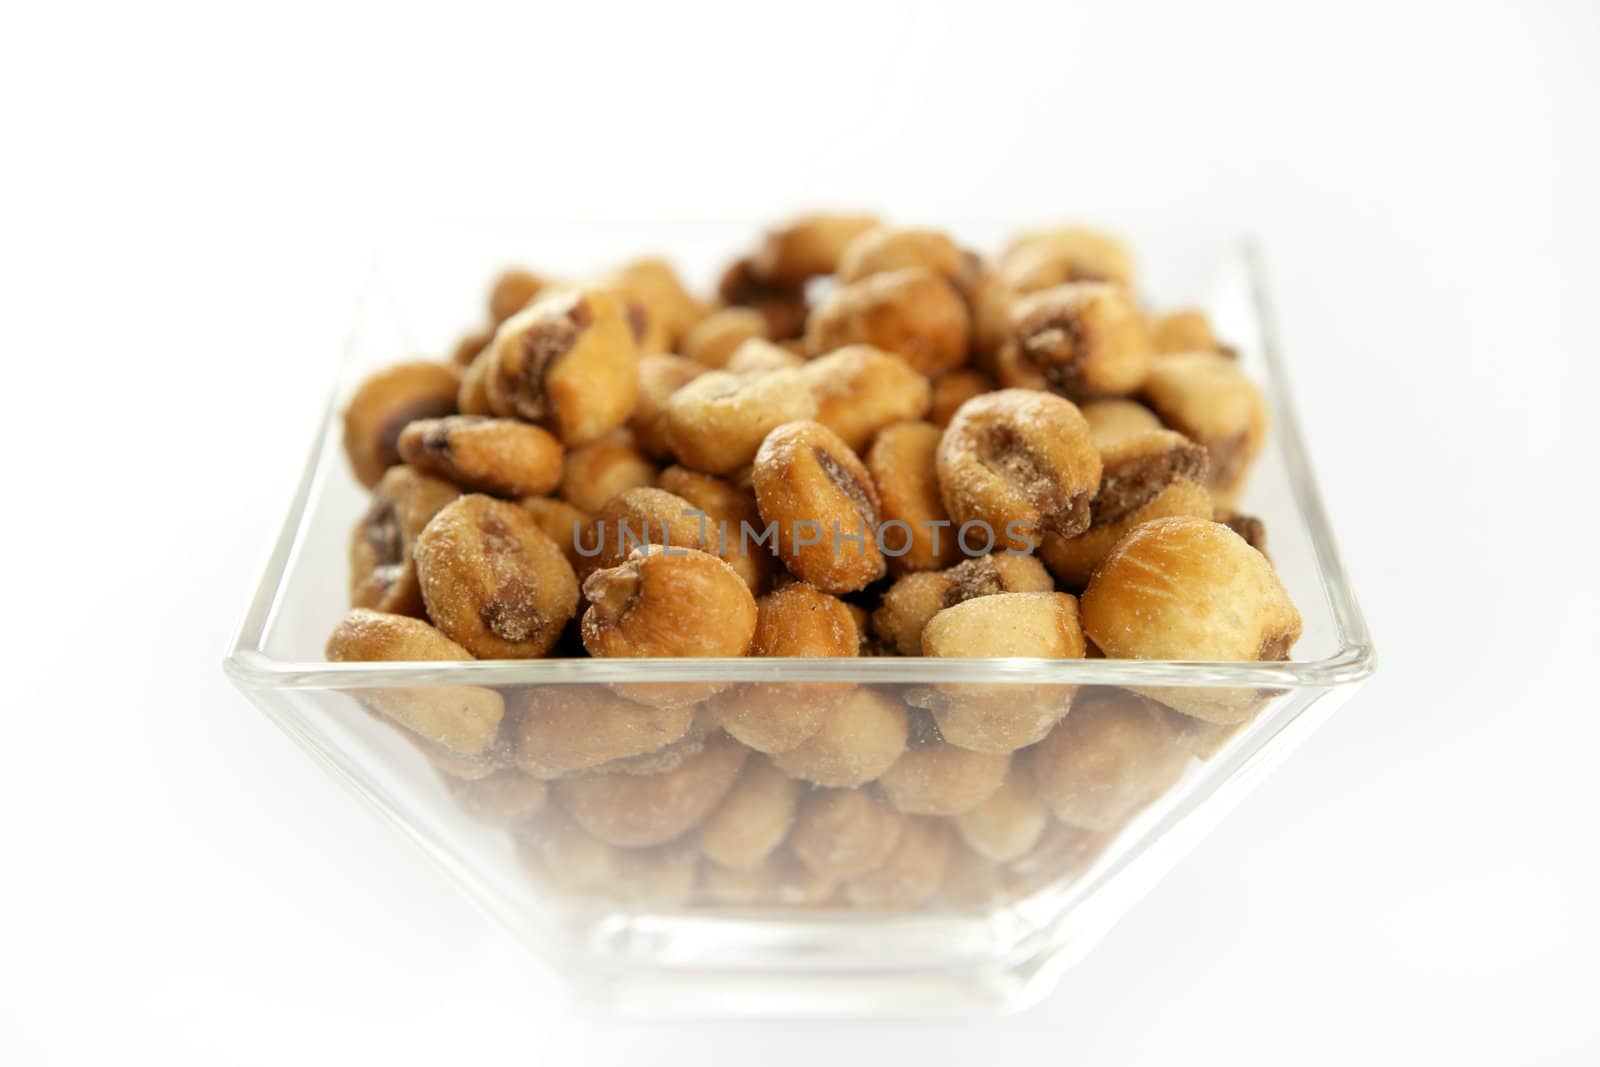 Roastwed salted corn in a transparent glass bowl, white background studio shoot